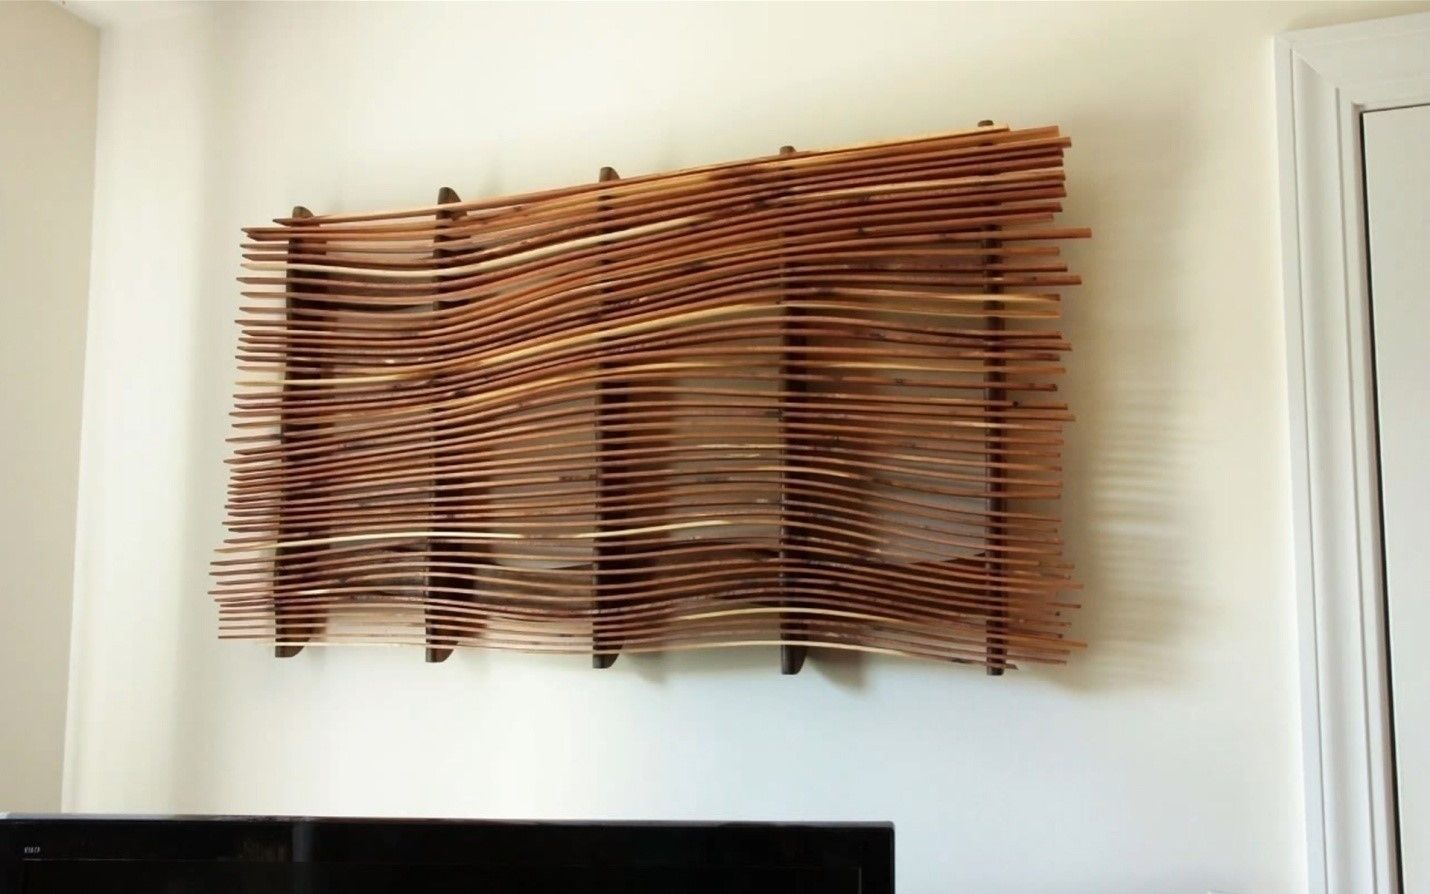 How To Make Wall Art From Scrap Wood | Diy Project – Cut The Wood With Regard To Wood Wall Art (View 6 of 20)